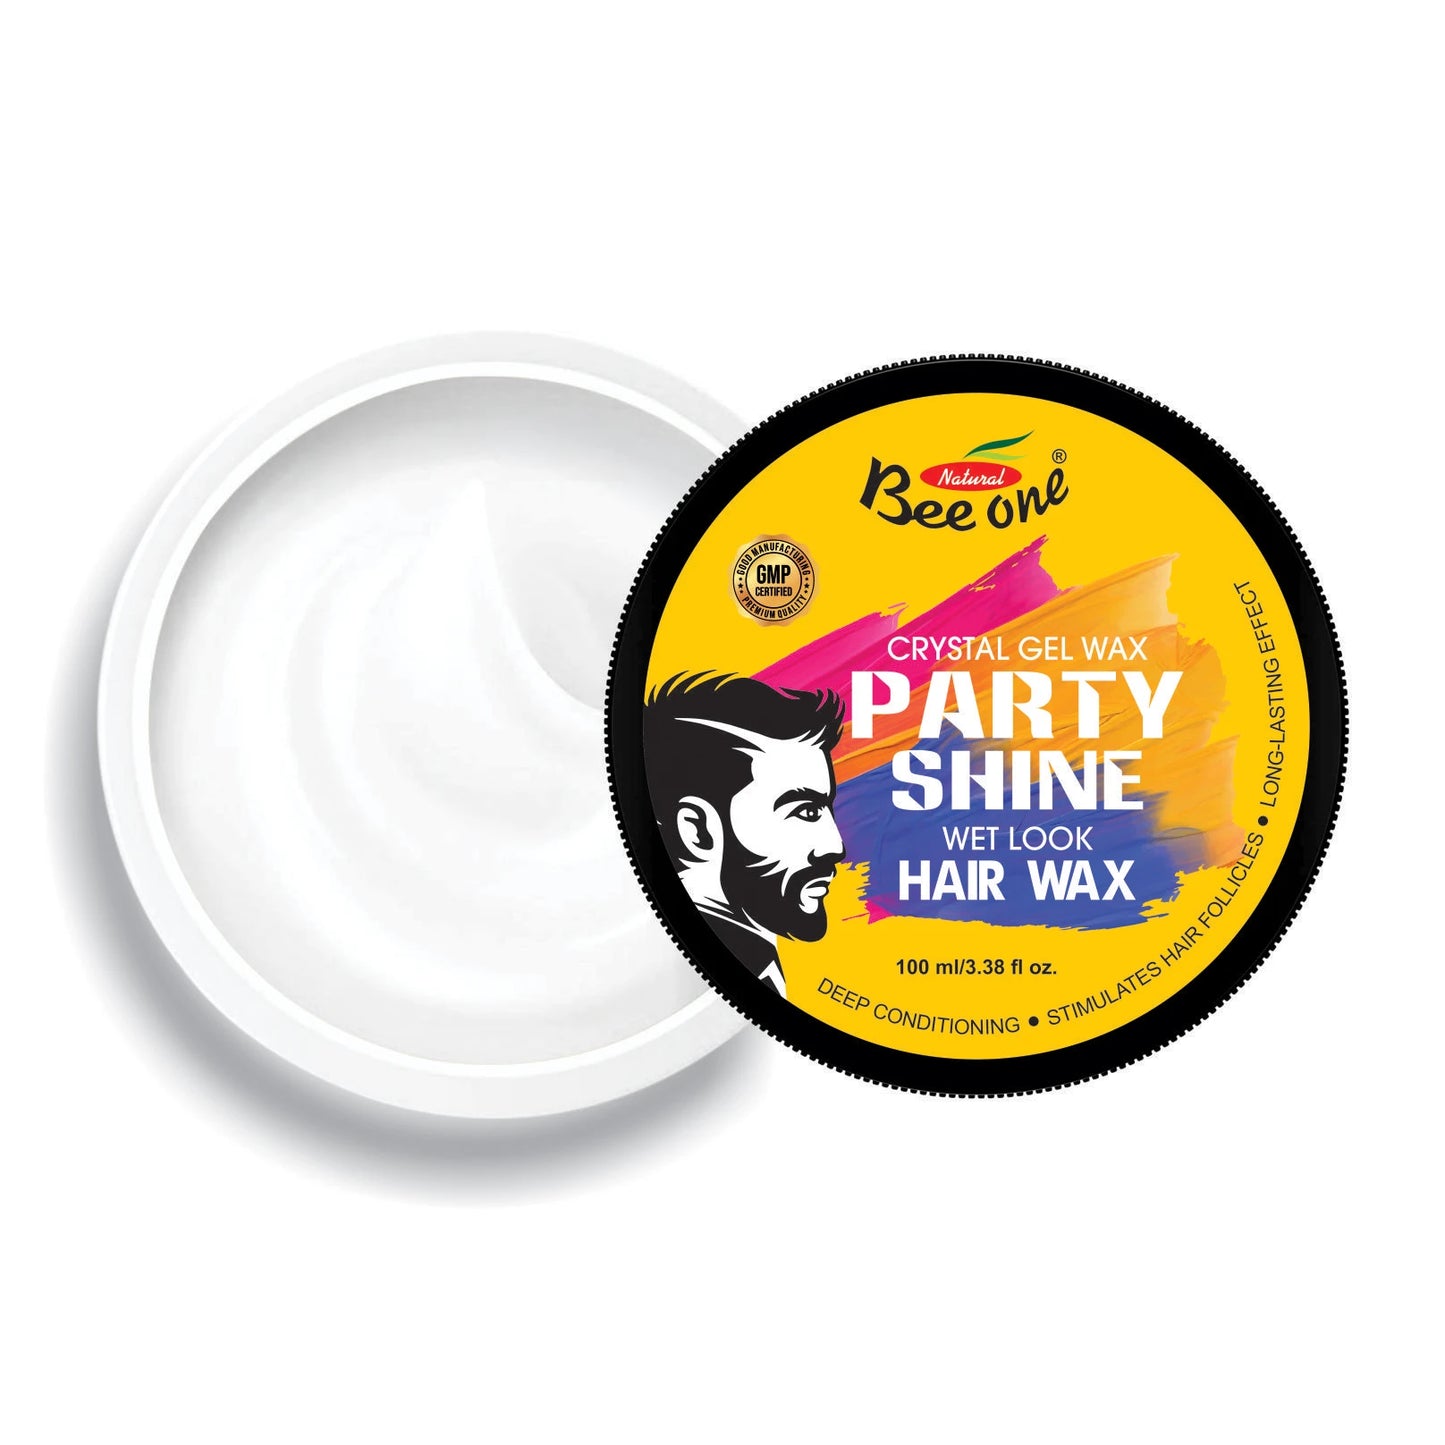 PARTY SHINE STYLING HAIR WAX